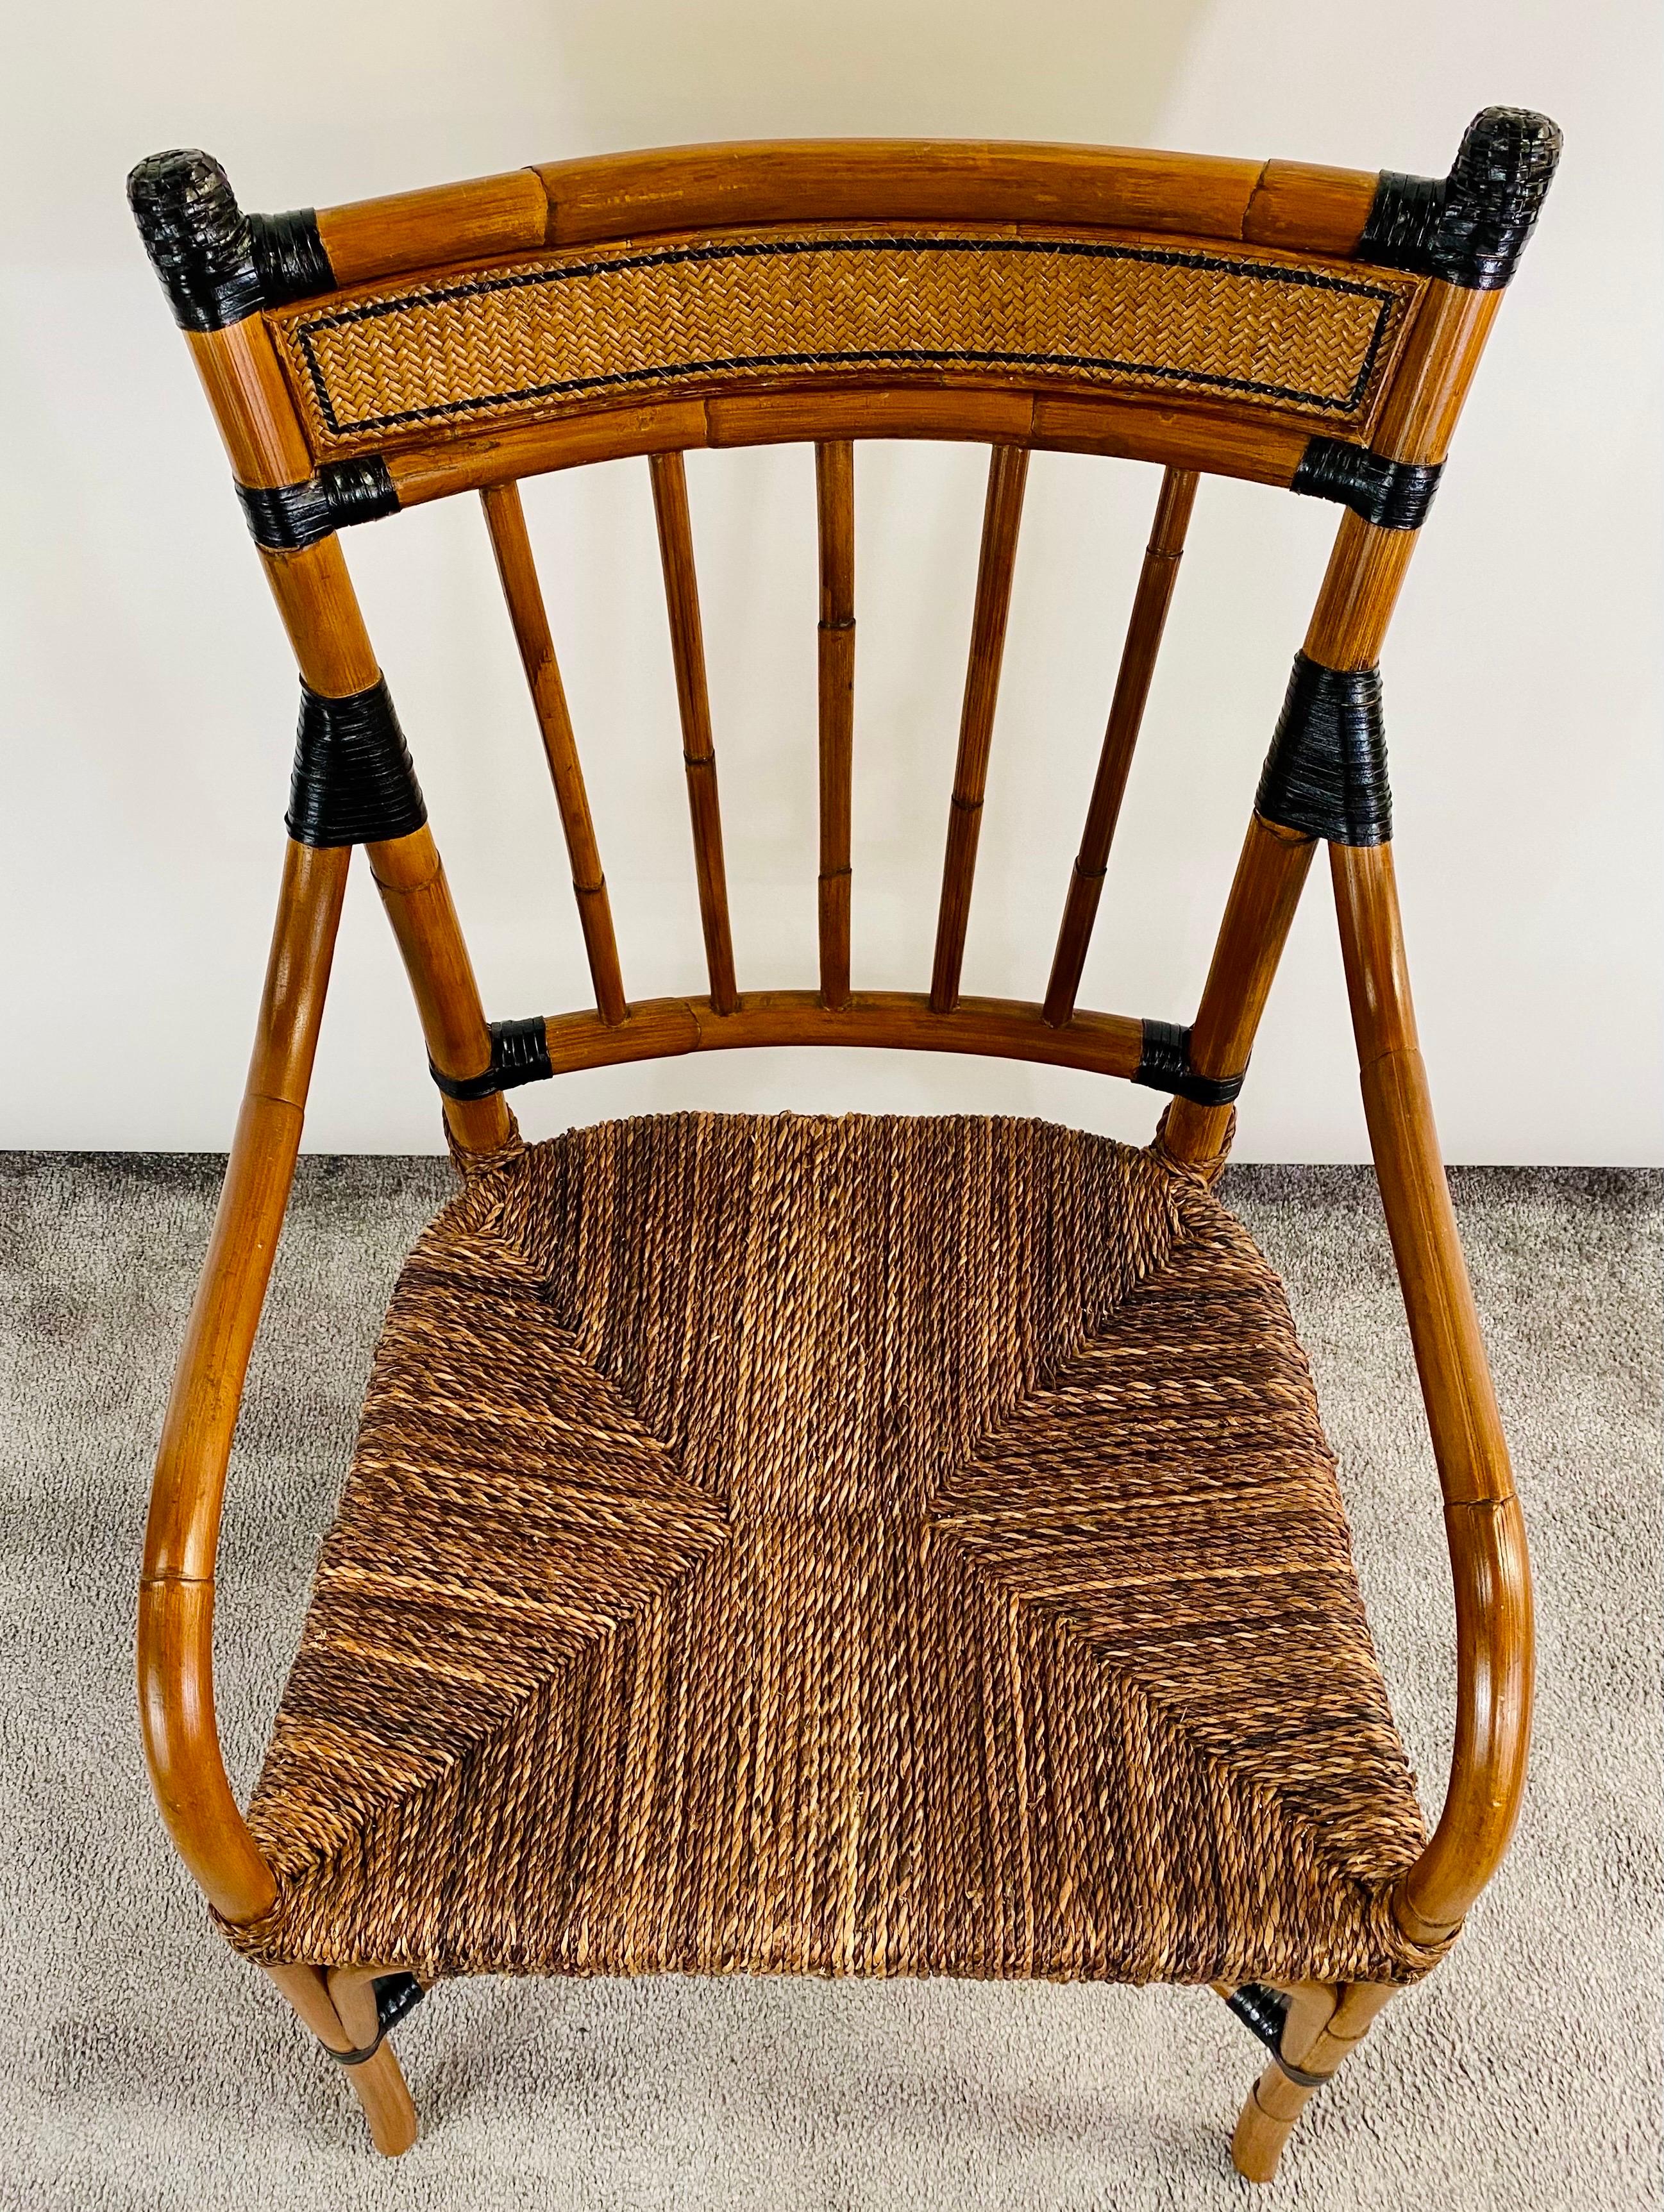 Bohemian Mid Century Boho Chic Faux Bamboo Rattan Chair For Sale